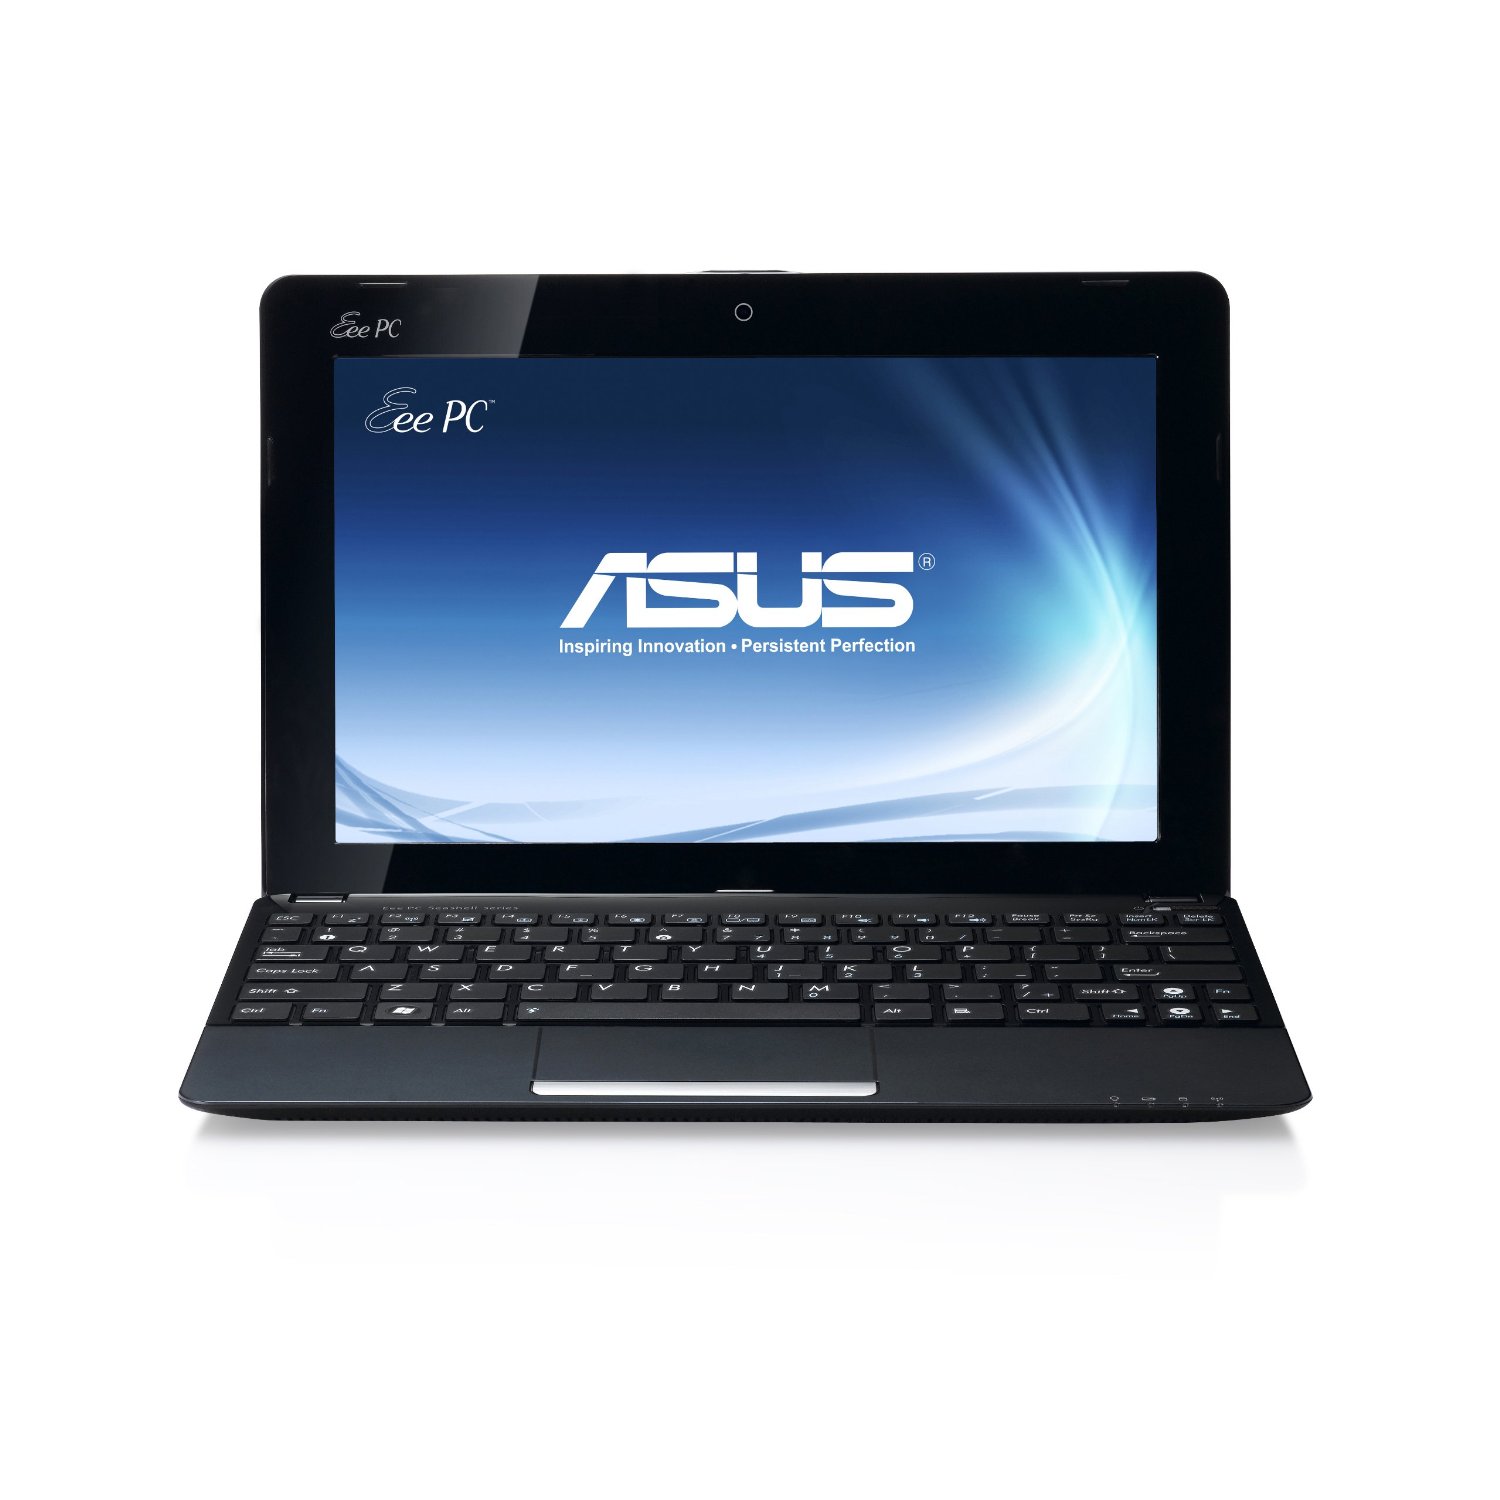 http://thetechjournal.com/wp-content/uploads/images/1112/1322737303-asus-eee-pc-1015pxsu17bk-101inch-netbook-6.jpg